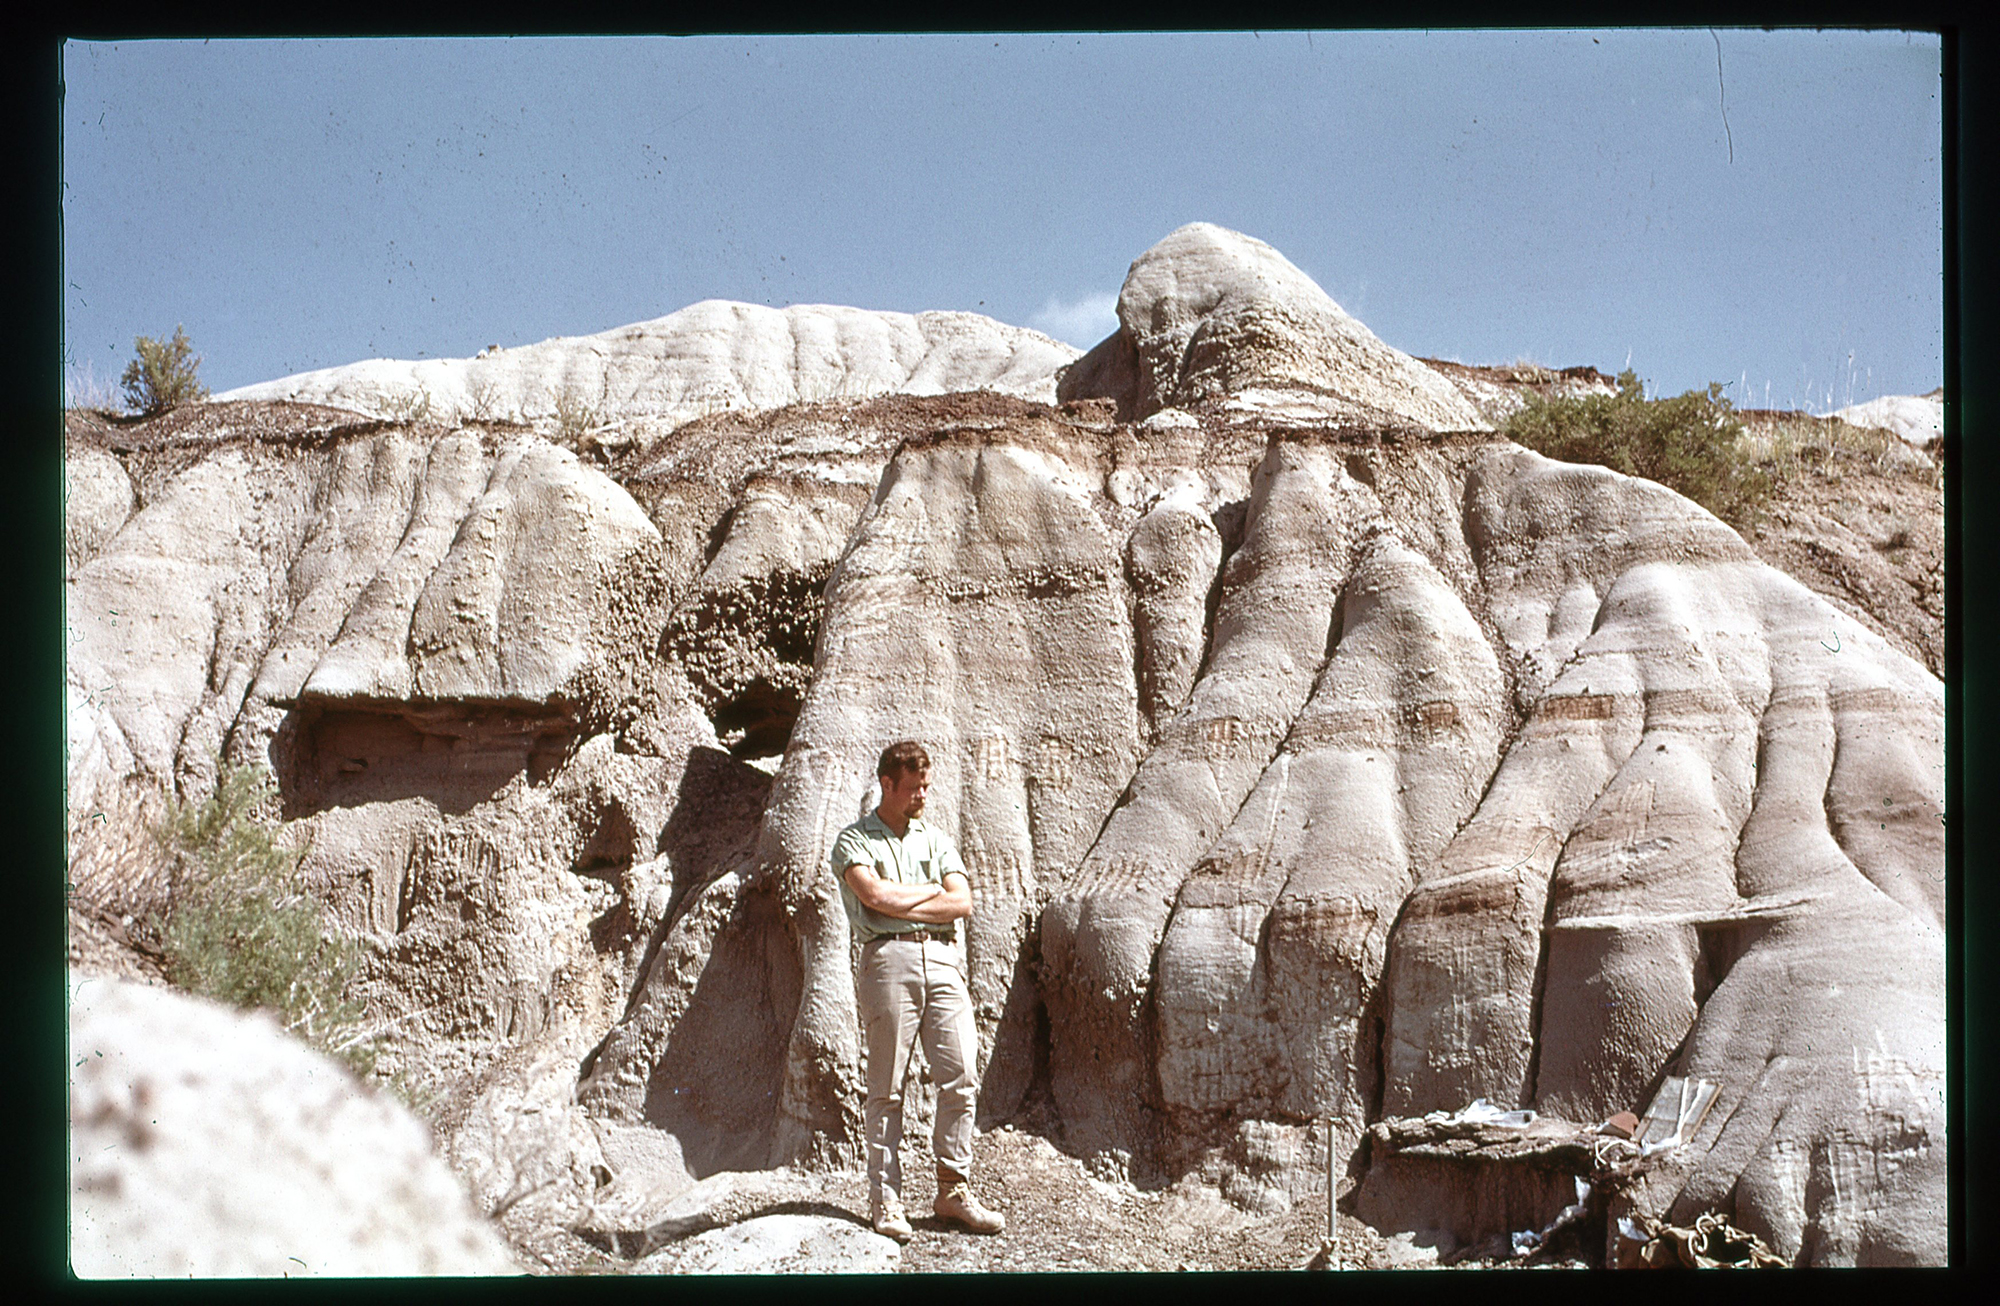 Peter Dodson in the 1960s standing with arms folded against a rock outcropping.